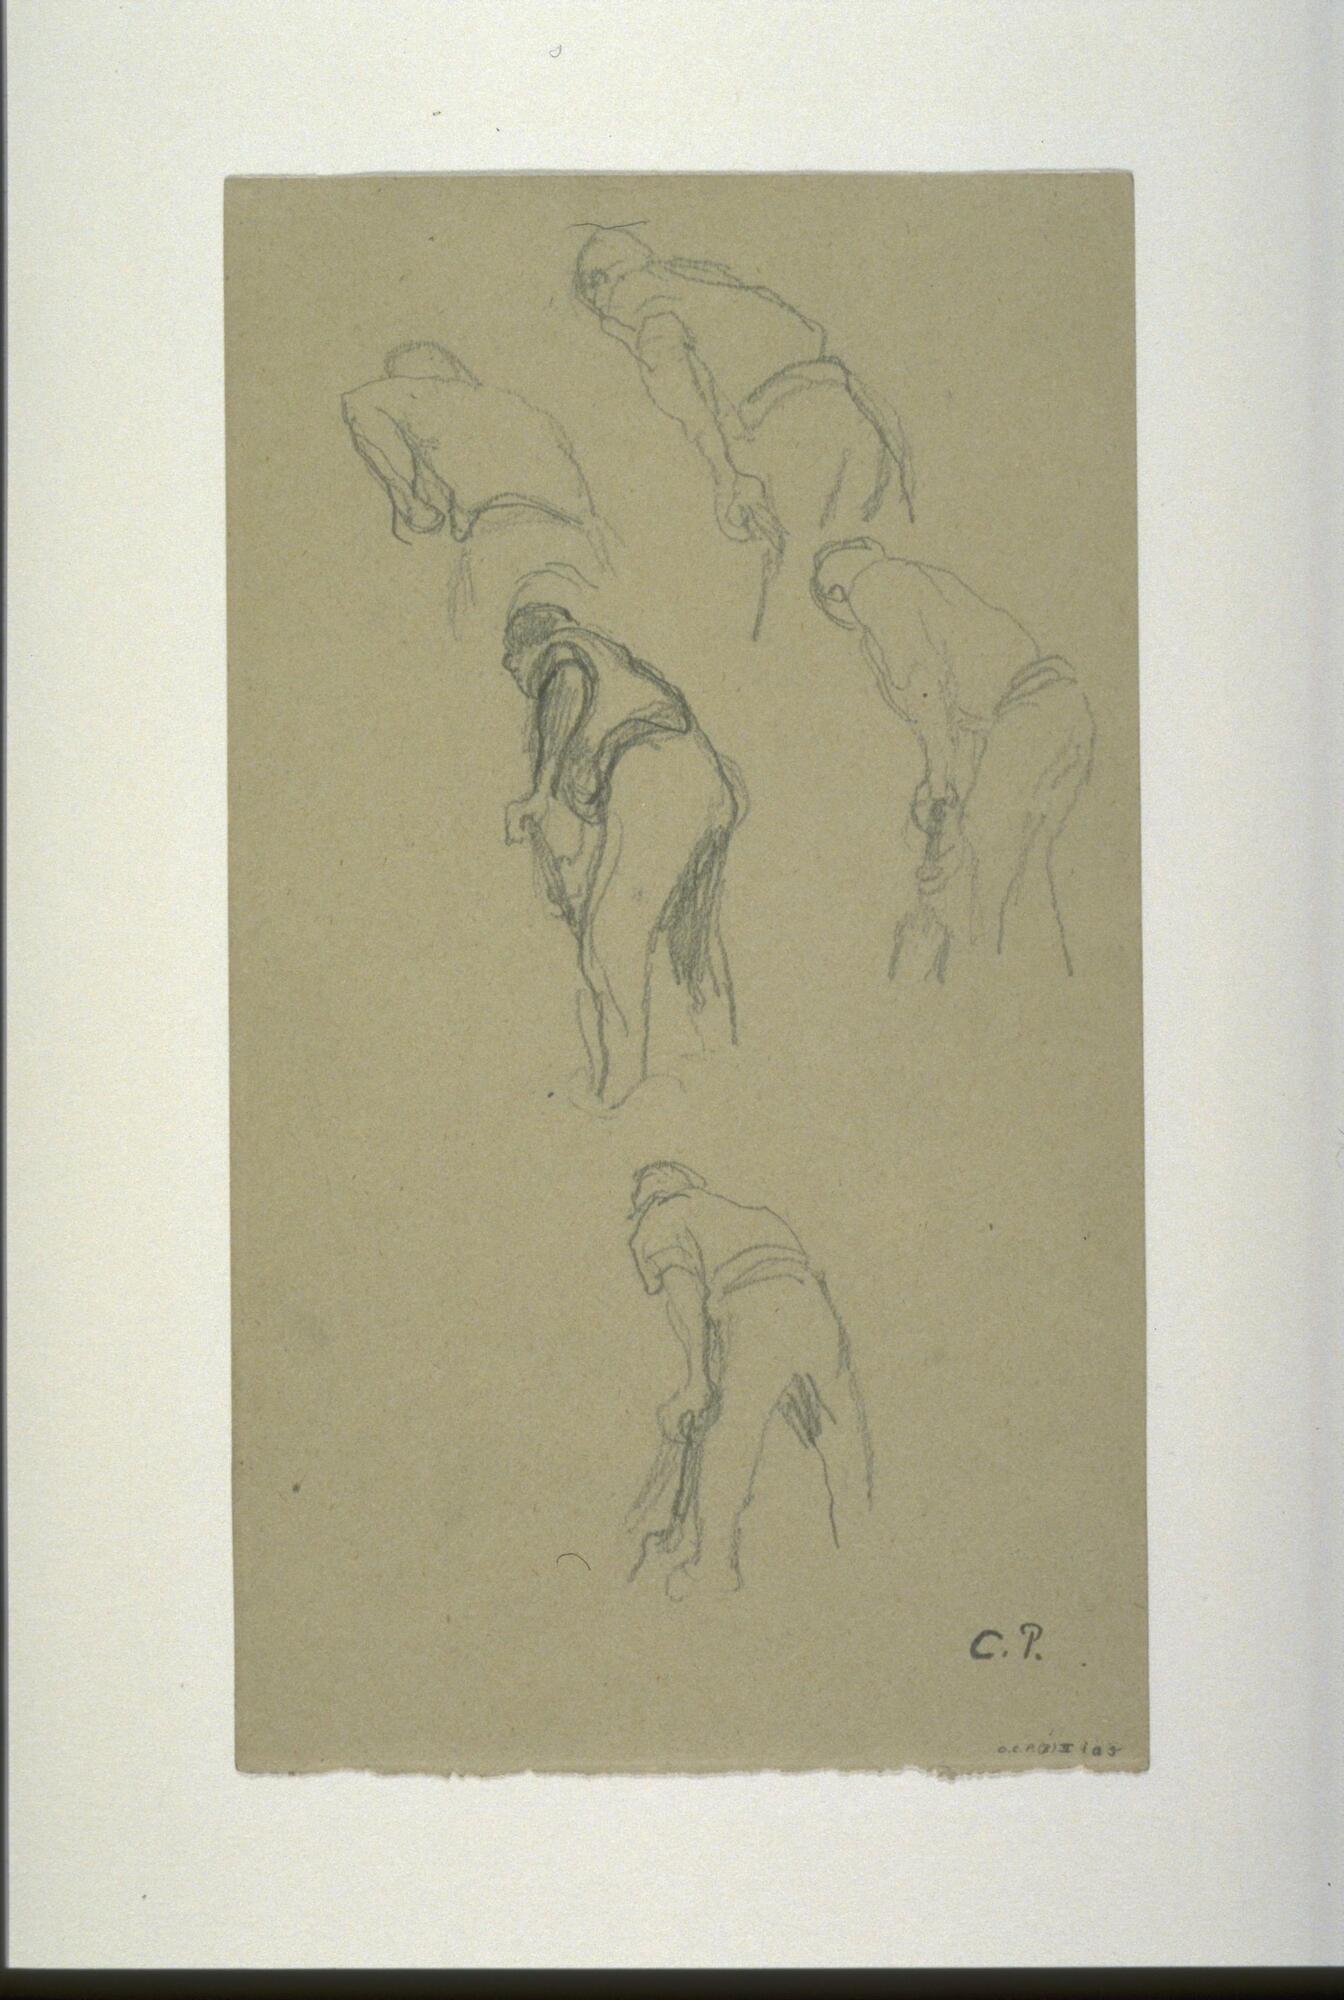 This quick pencil study shows five sketches of a man digging; he is not seen in a single pose, but these sketches seen from behind explore a number of actions that are part of the digging.